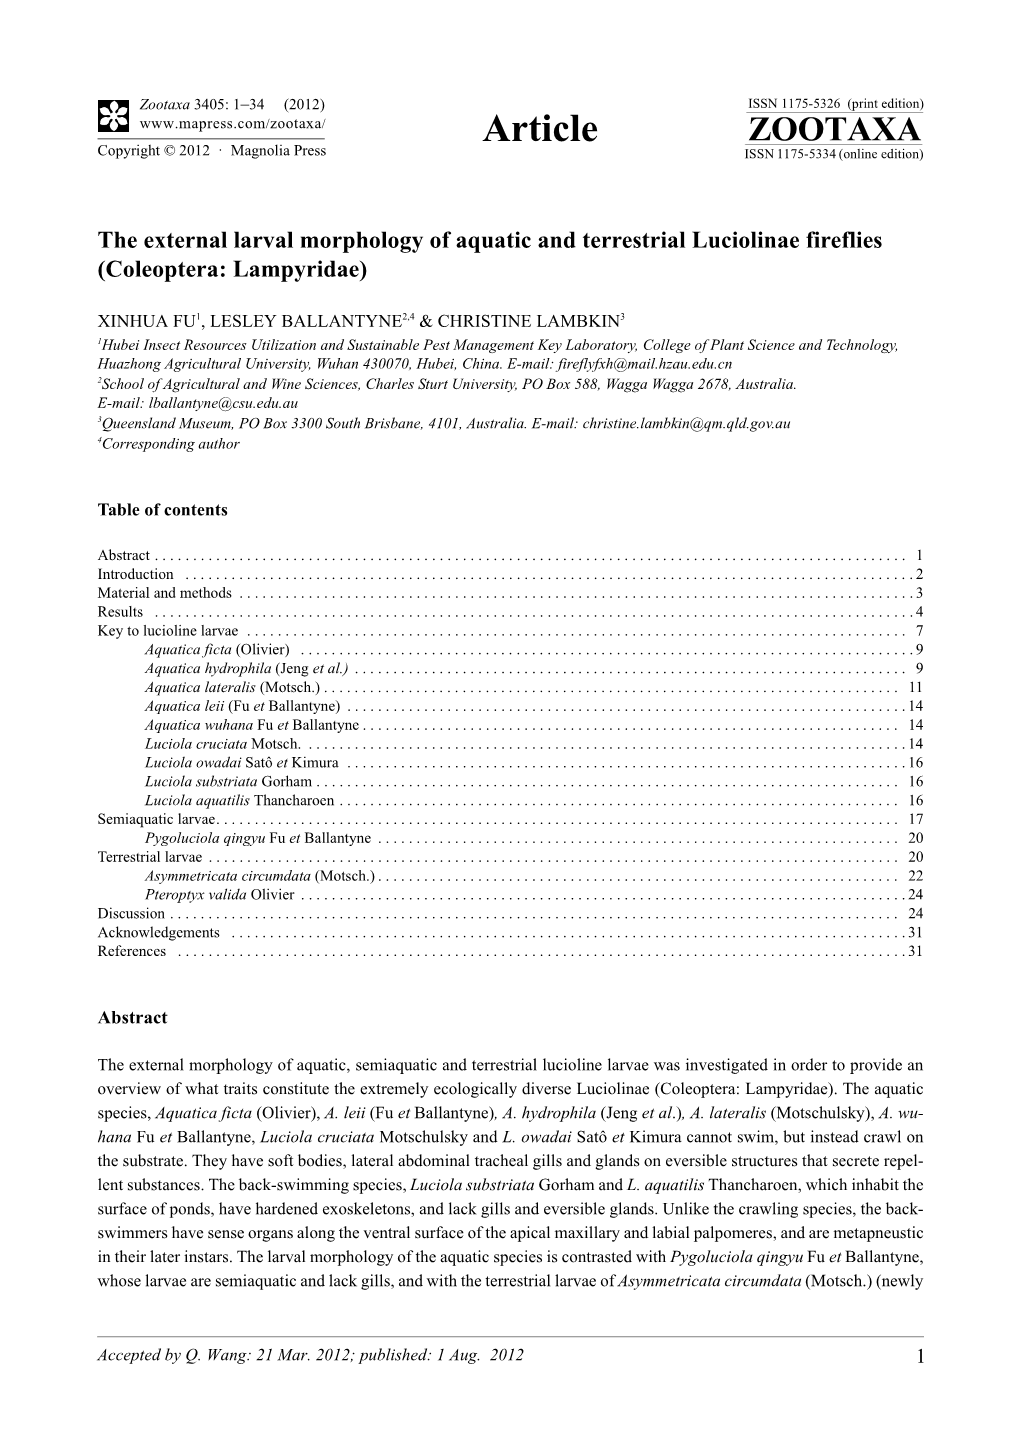 The External Larval Morphology of Aquatic and Terrestrial Luciolinae Fireflies (Coleoptera: Lampyridae)